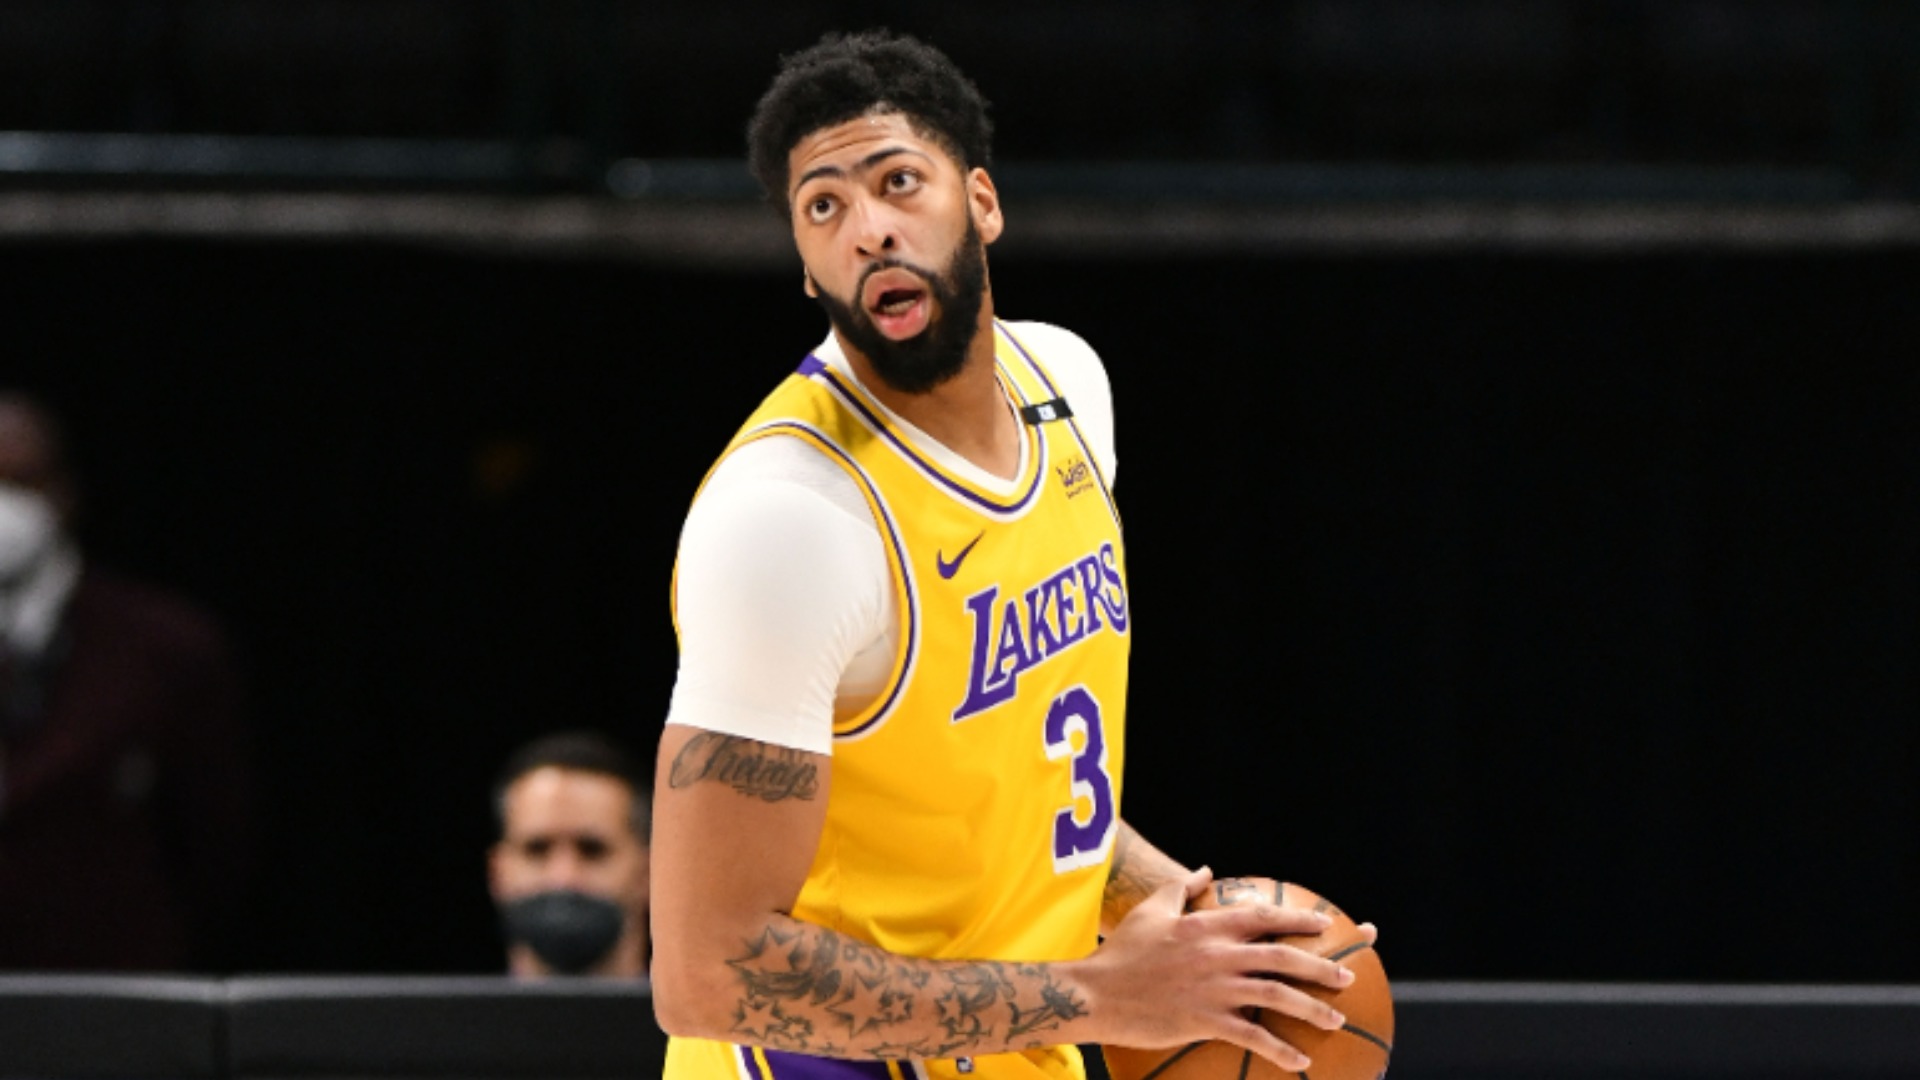 Lakers' coach Frank Vogel expected 'rust' on Anthony Davis return